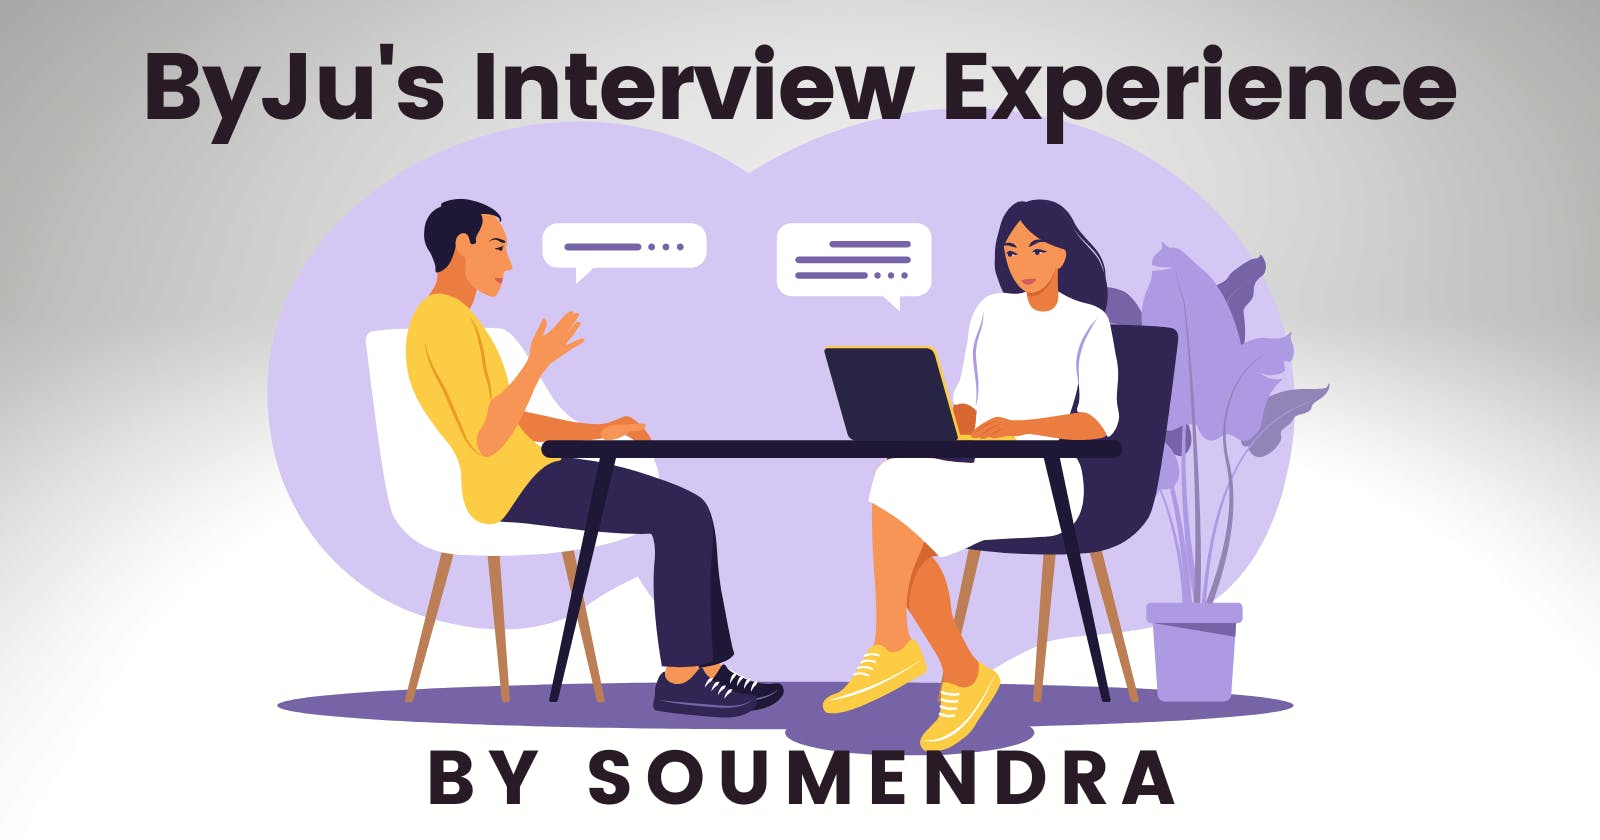 Interview experience in Byjus